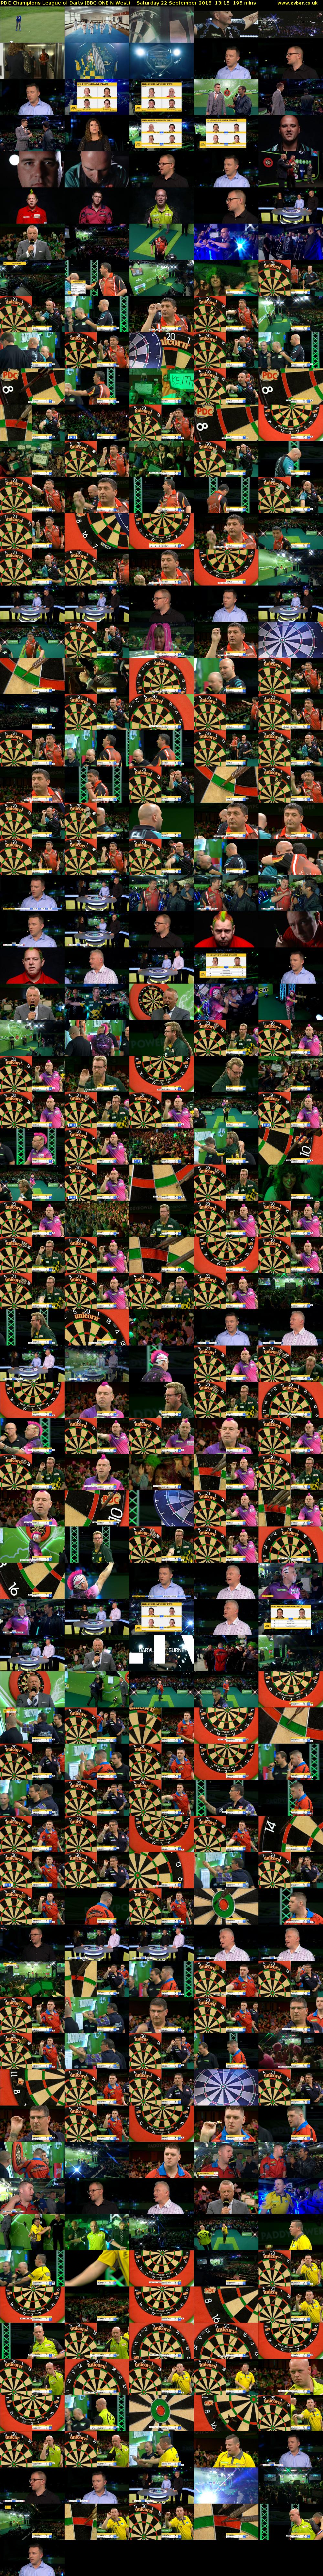 PDC Champions League of Darts (BBC ONE N West) Saturday 22 September 2018 13:15 - 16:30